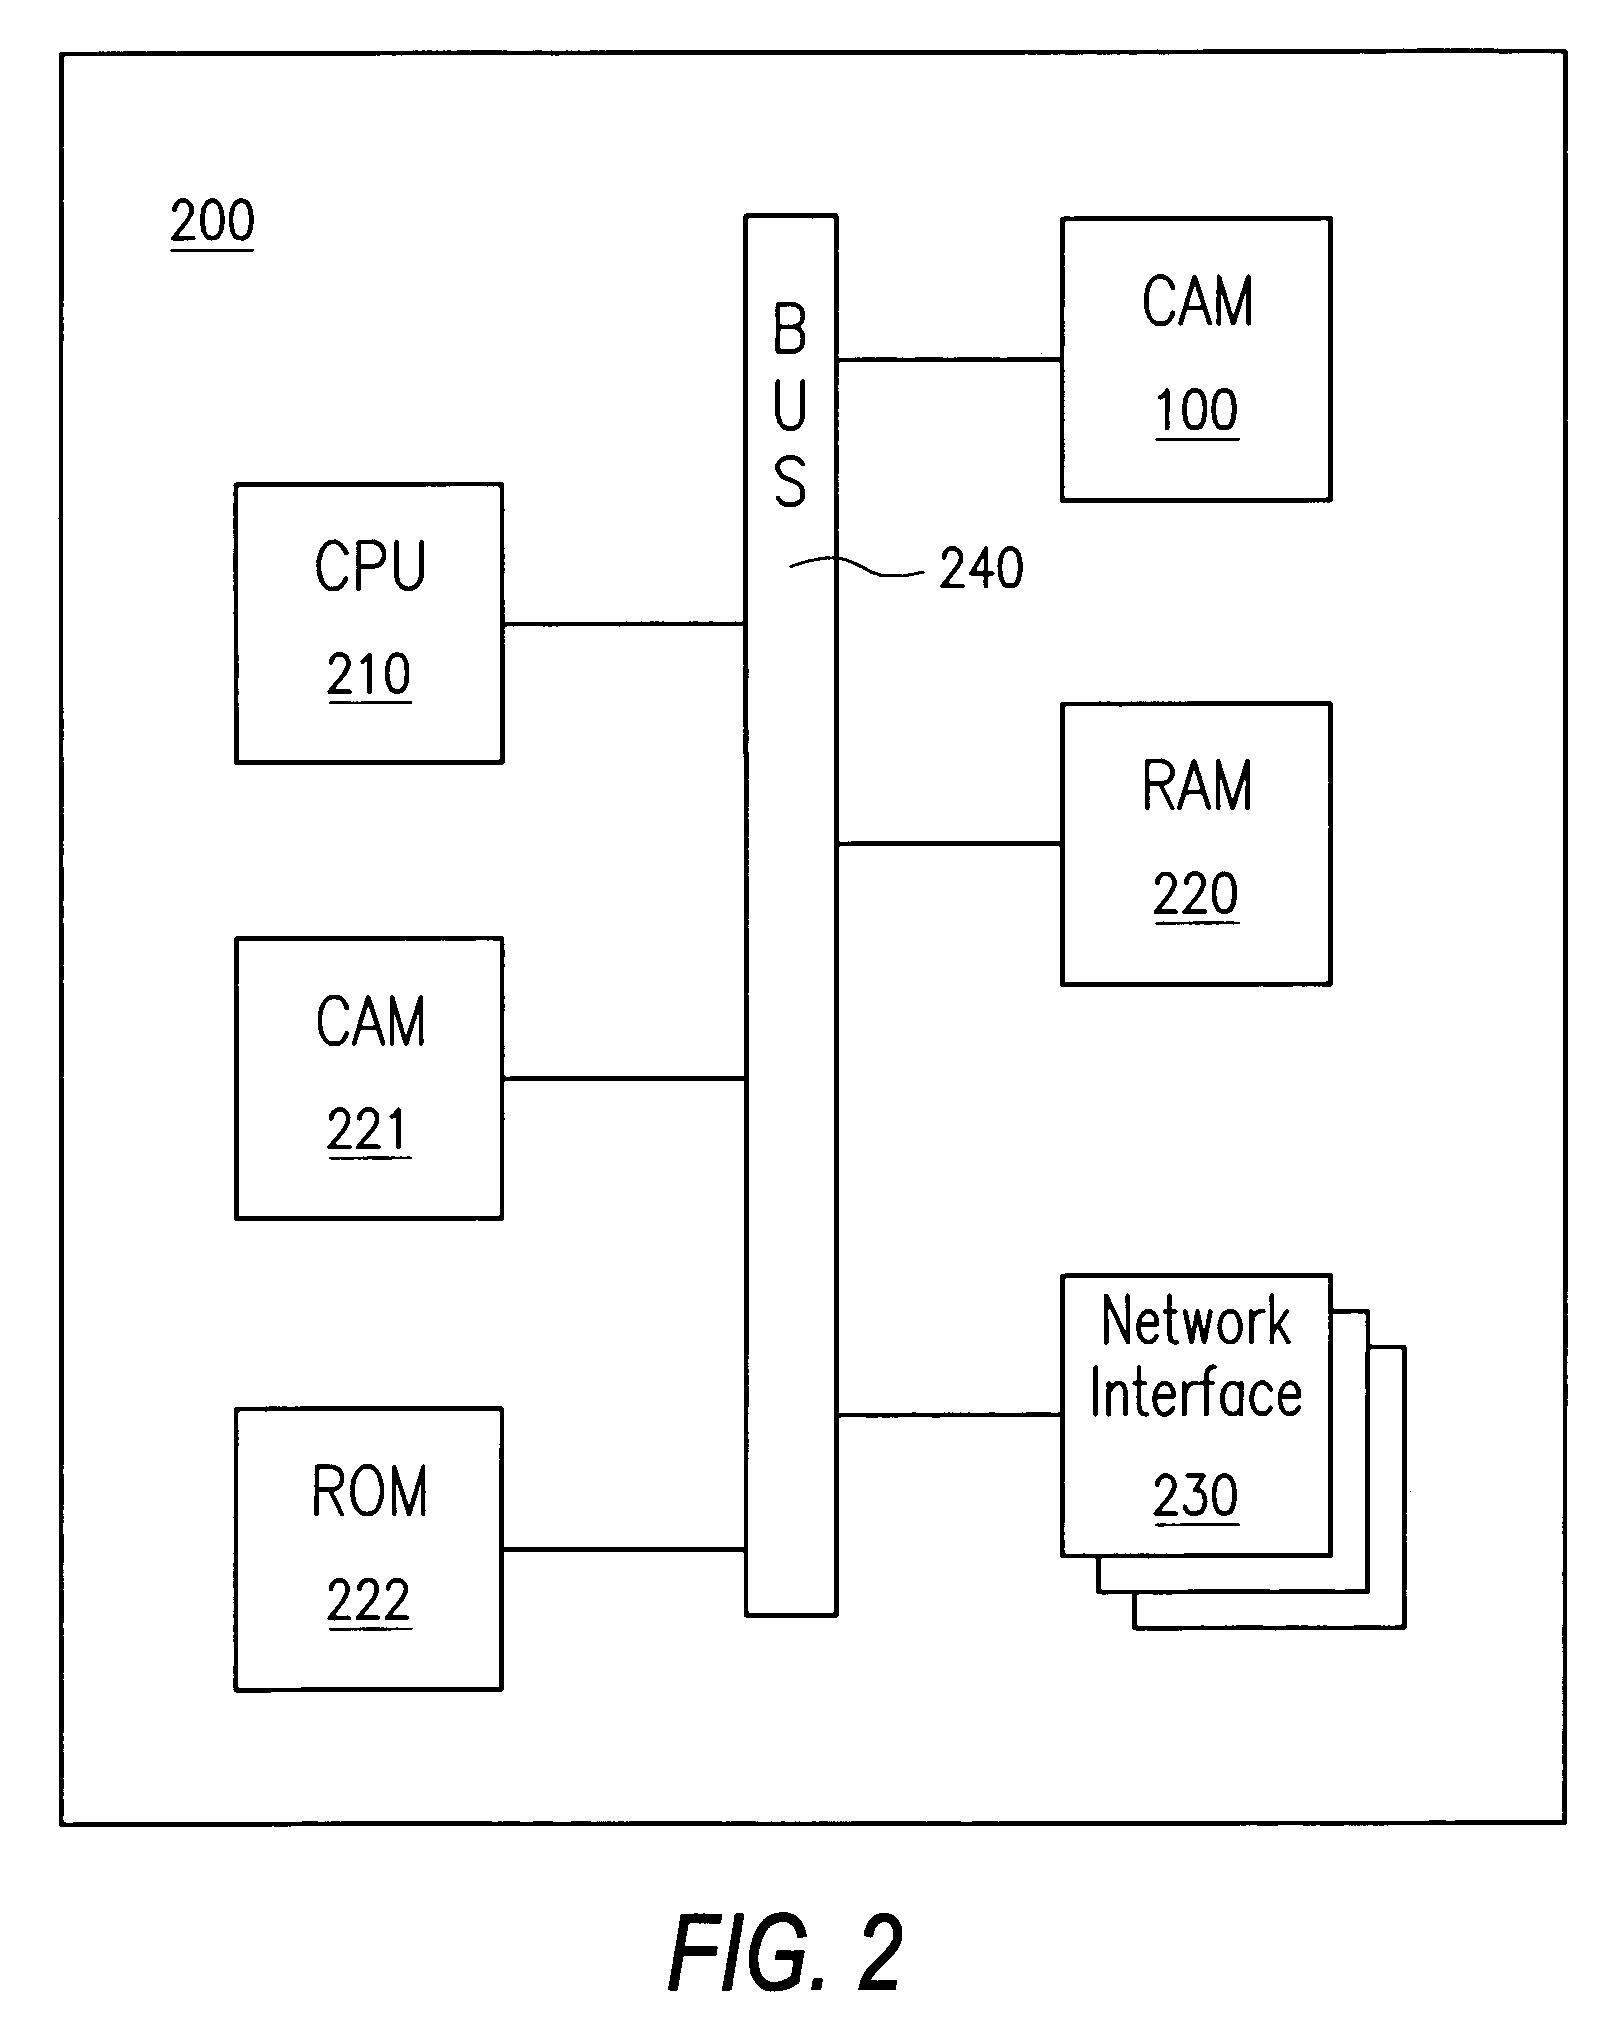 CAM modified to be used for statistic calculation in network switches and routers